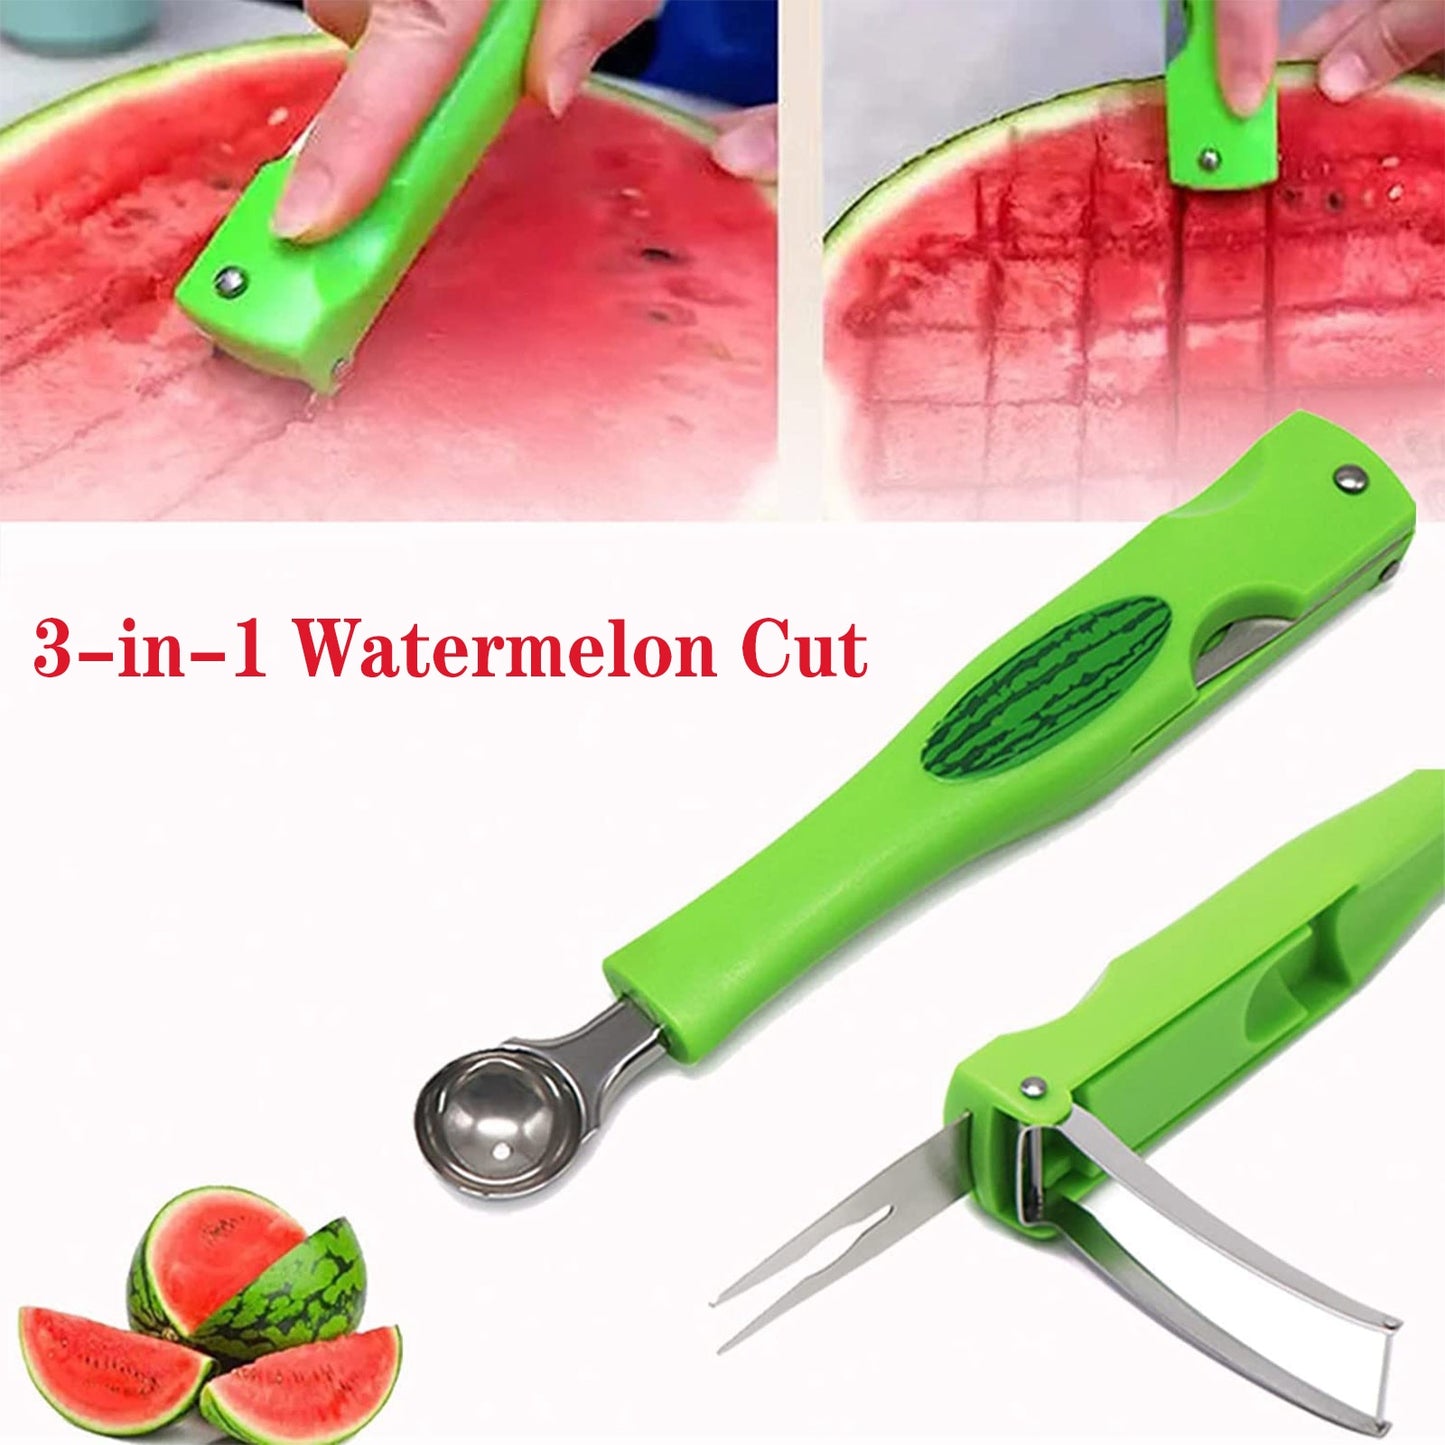 3 IN 1 Watermelon Splitter Pulp Spoon Fruit Ball Digger 304 Stainless Steel Household Watermelon Cutting Manual Kitchen Tool